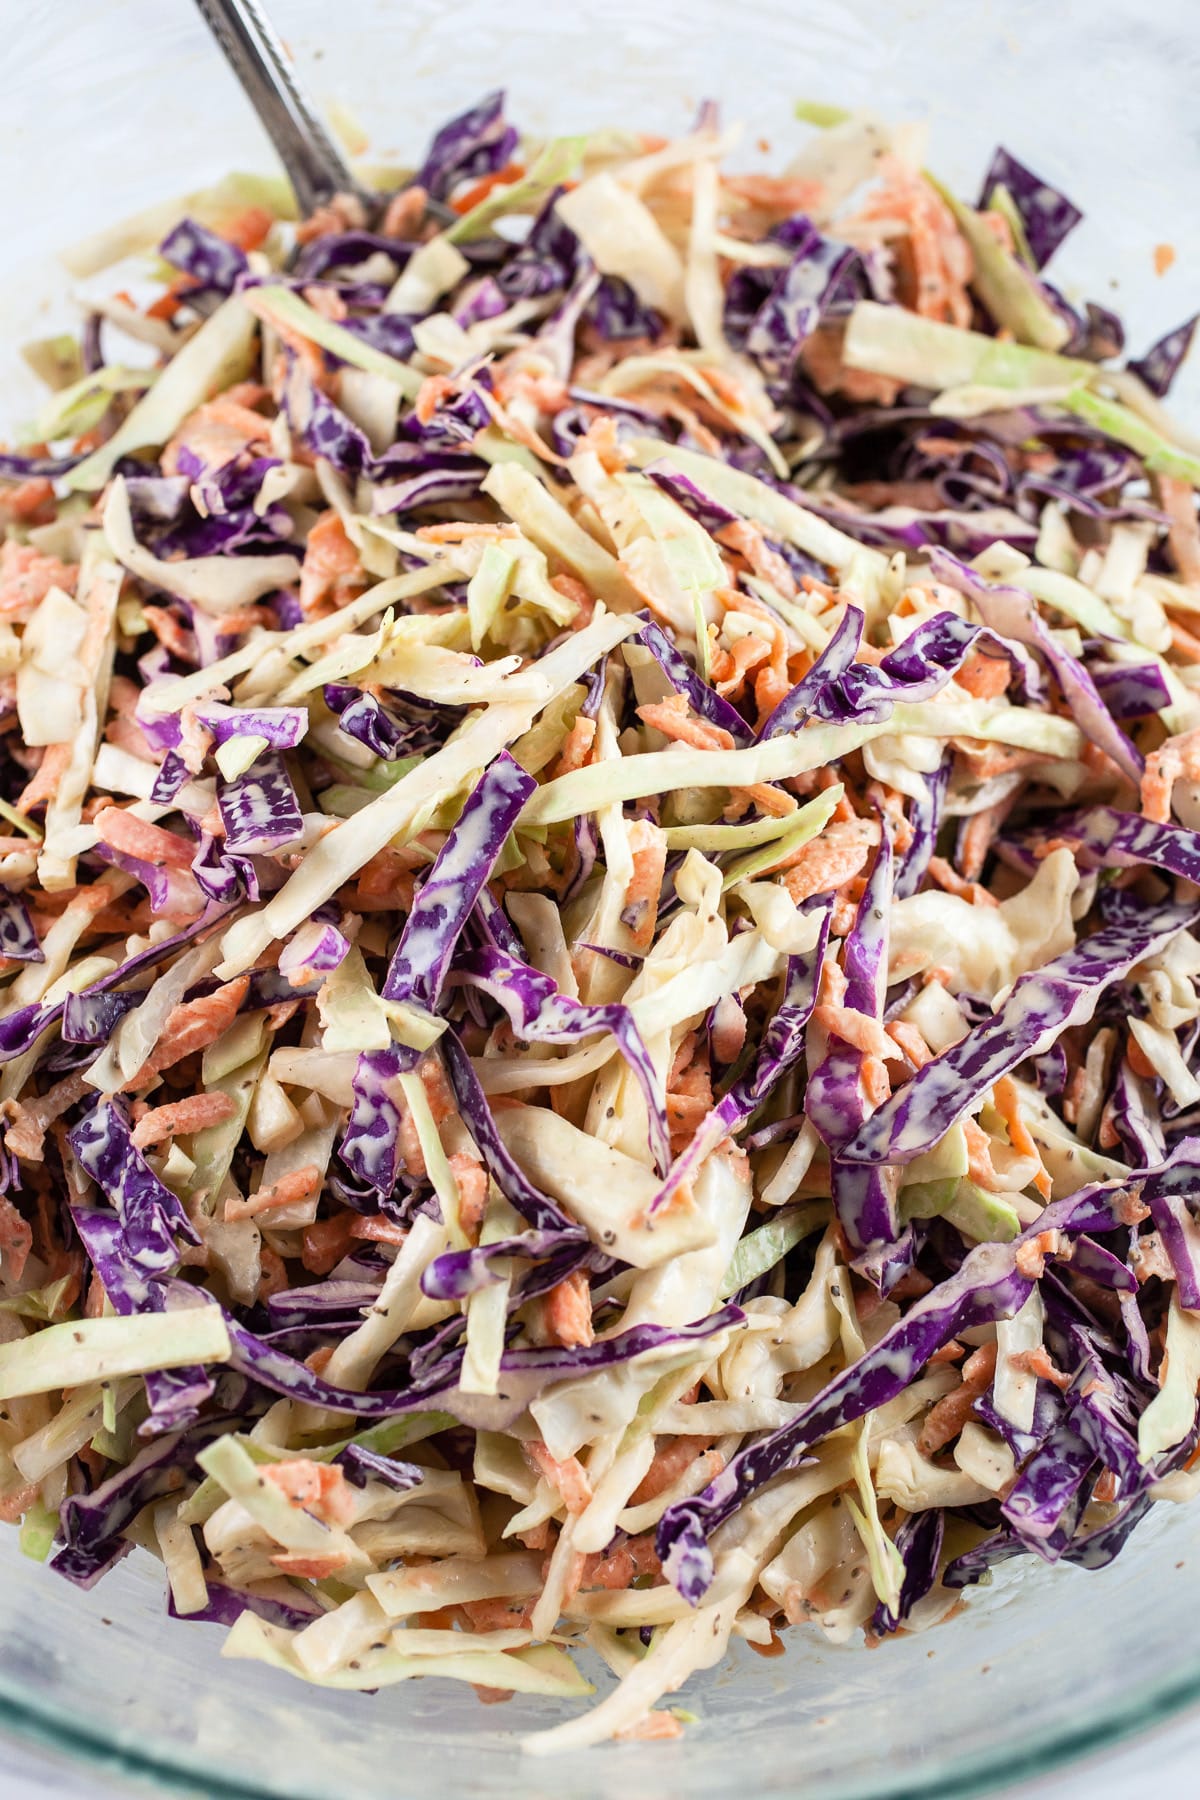 Shredded cabbage coleslaw in glass mixing bowl with spoon.